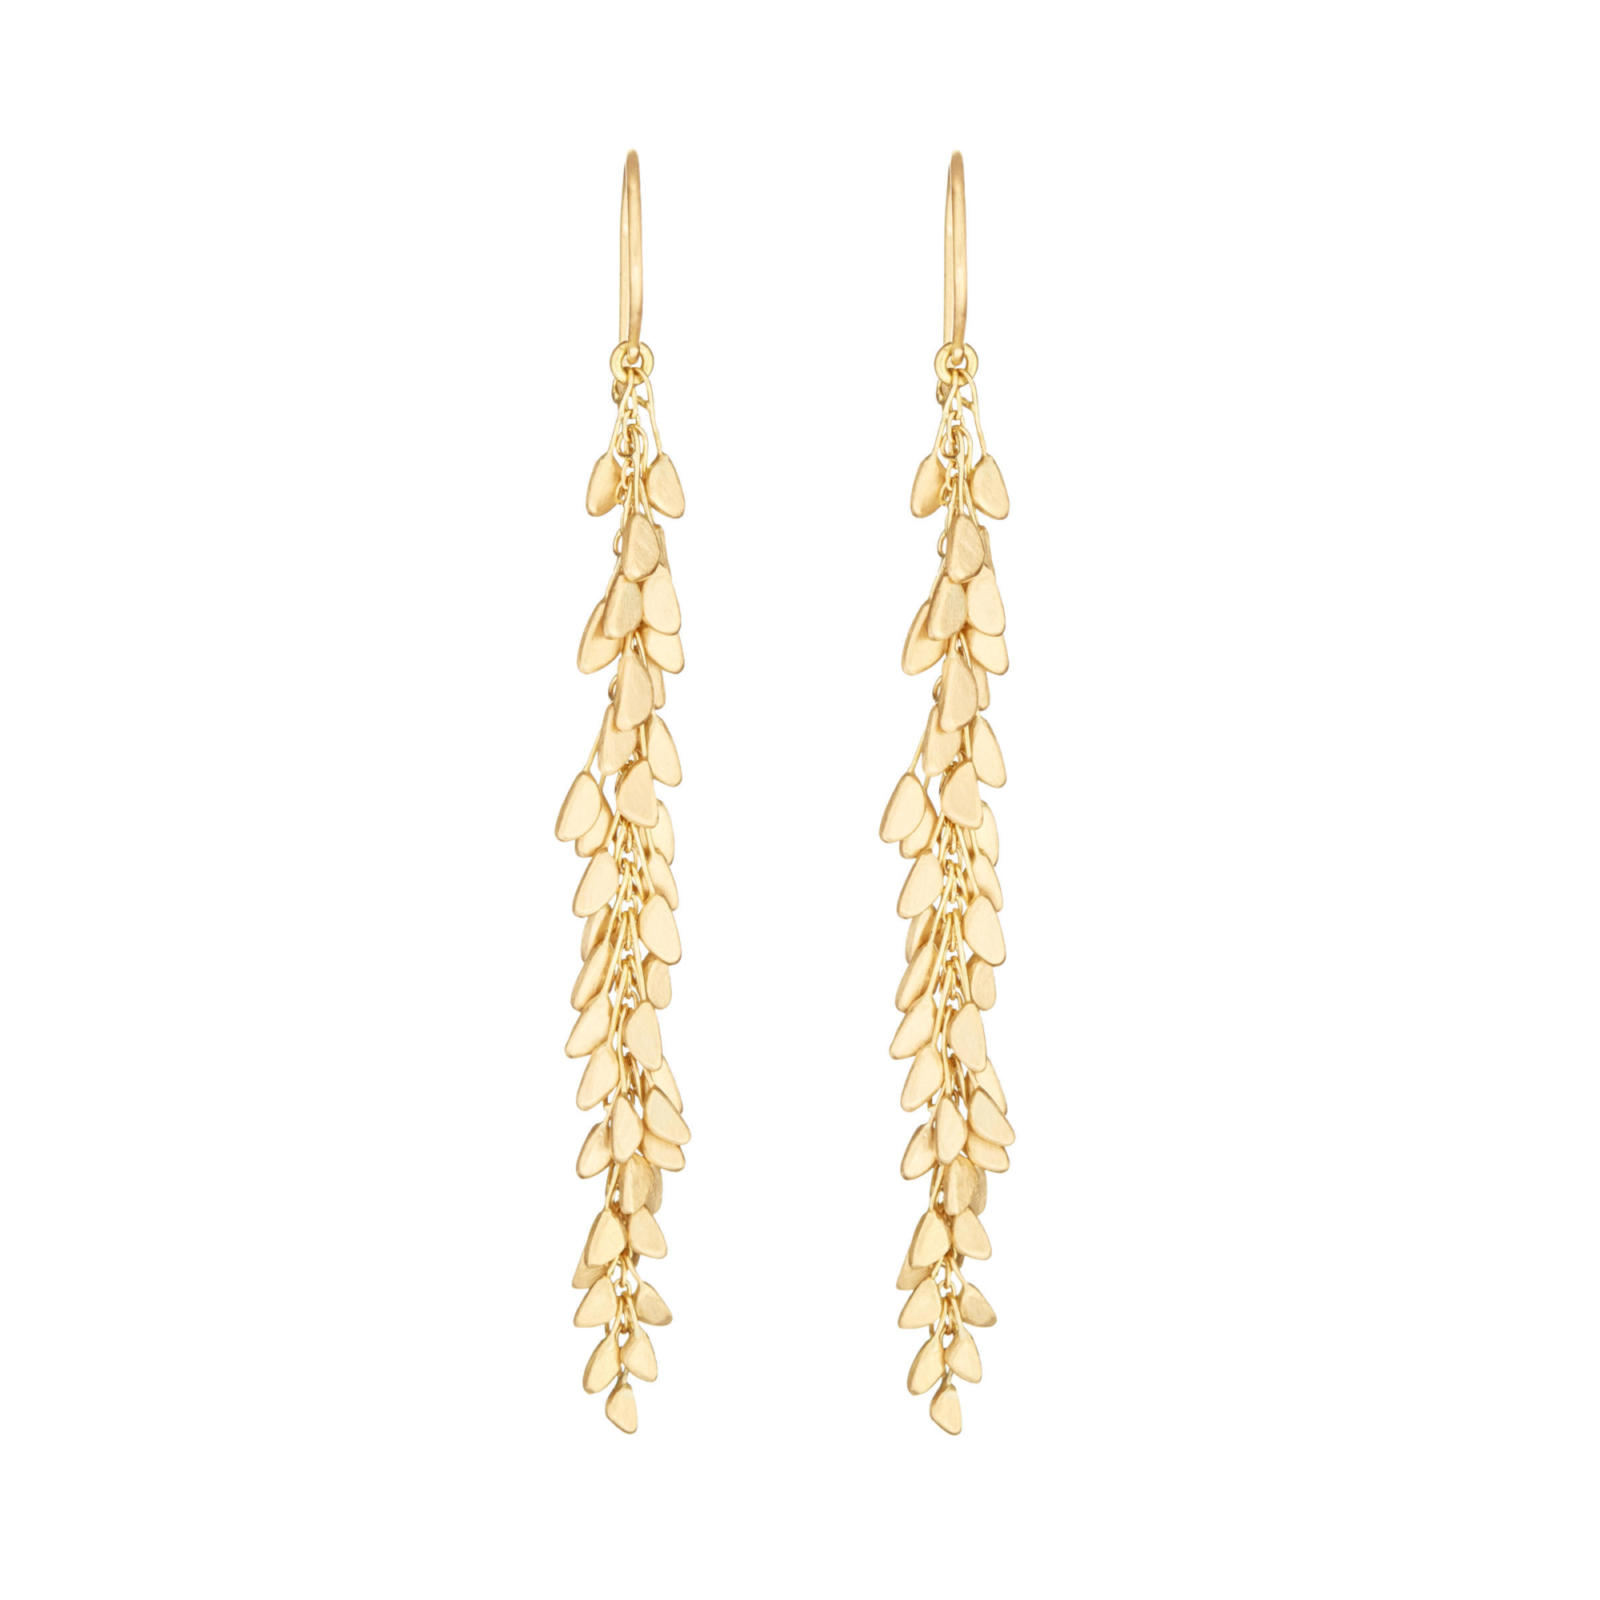 Sia Taylor ME8 Y Yellow Gold Earrings WB